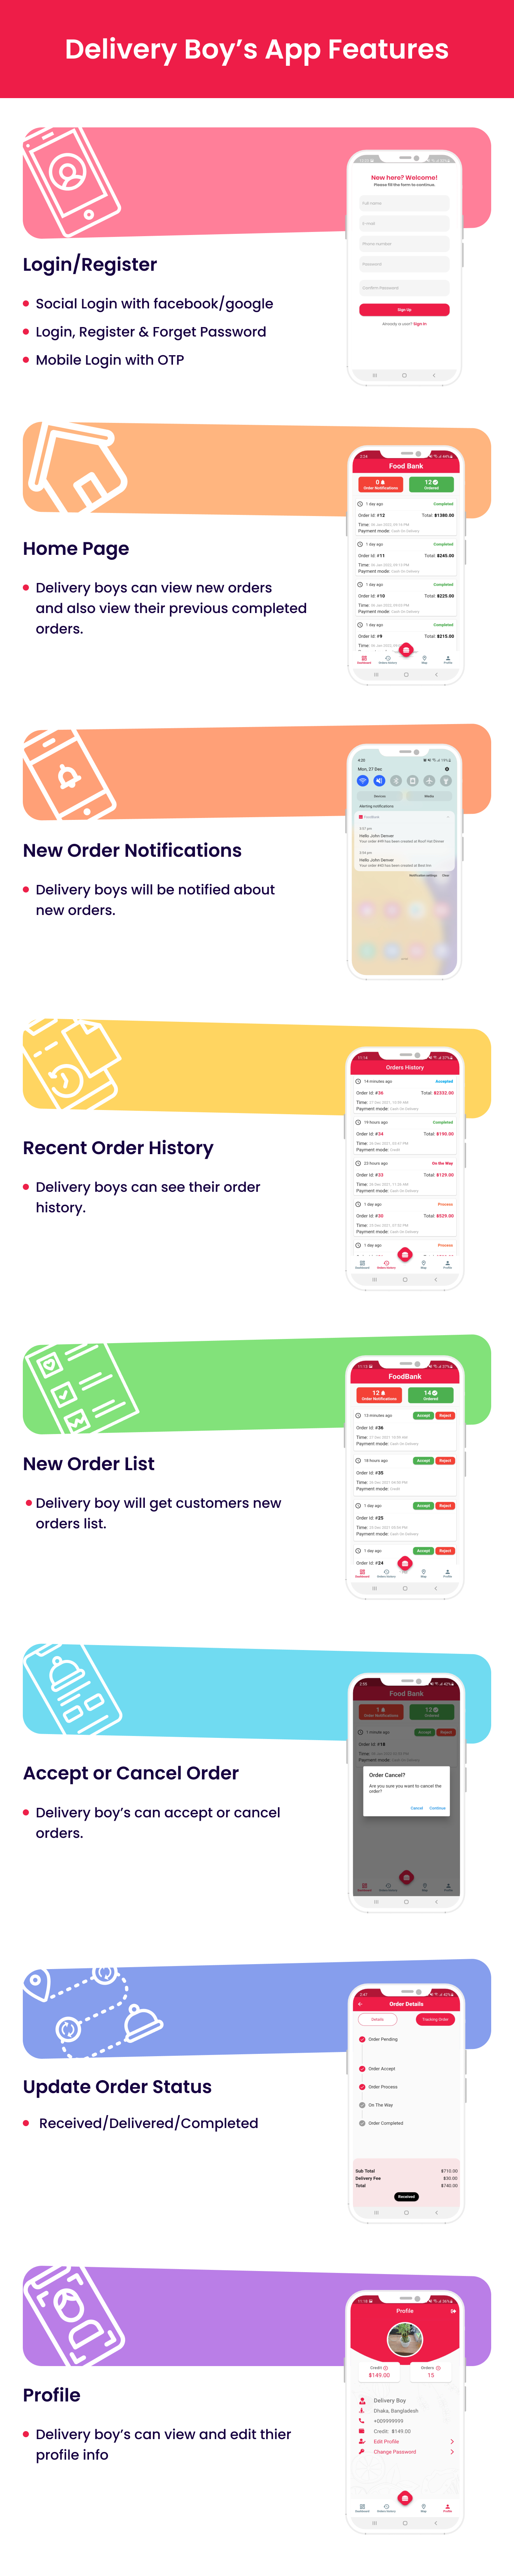 Delivery Boys App Workflow